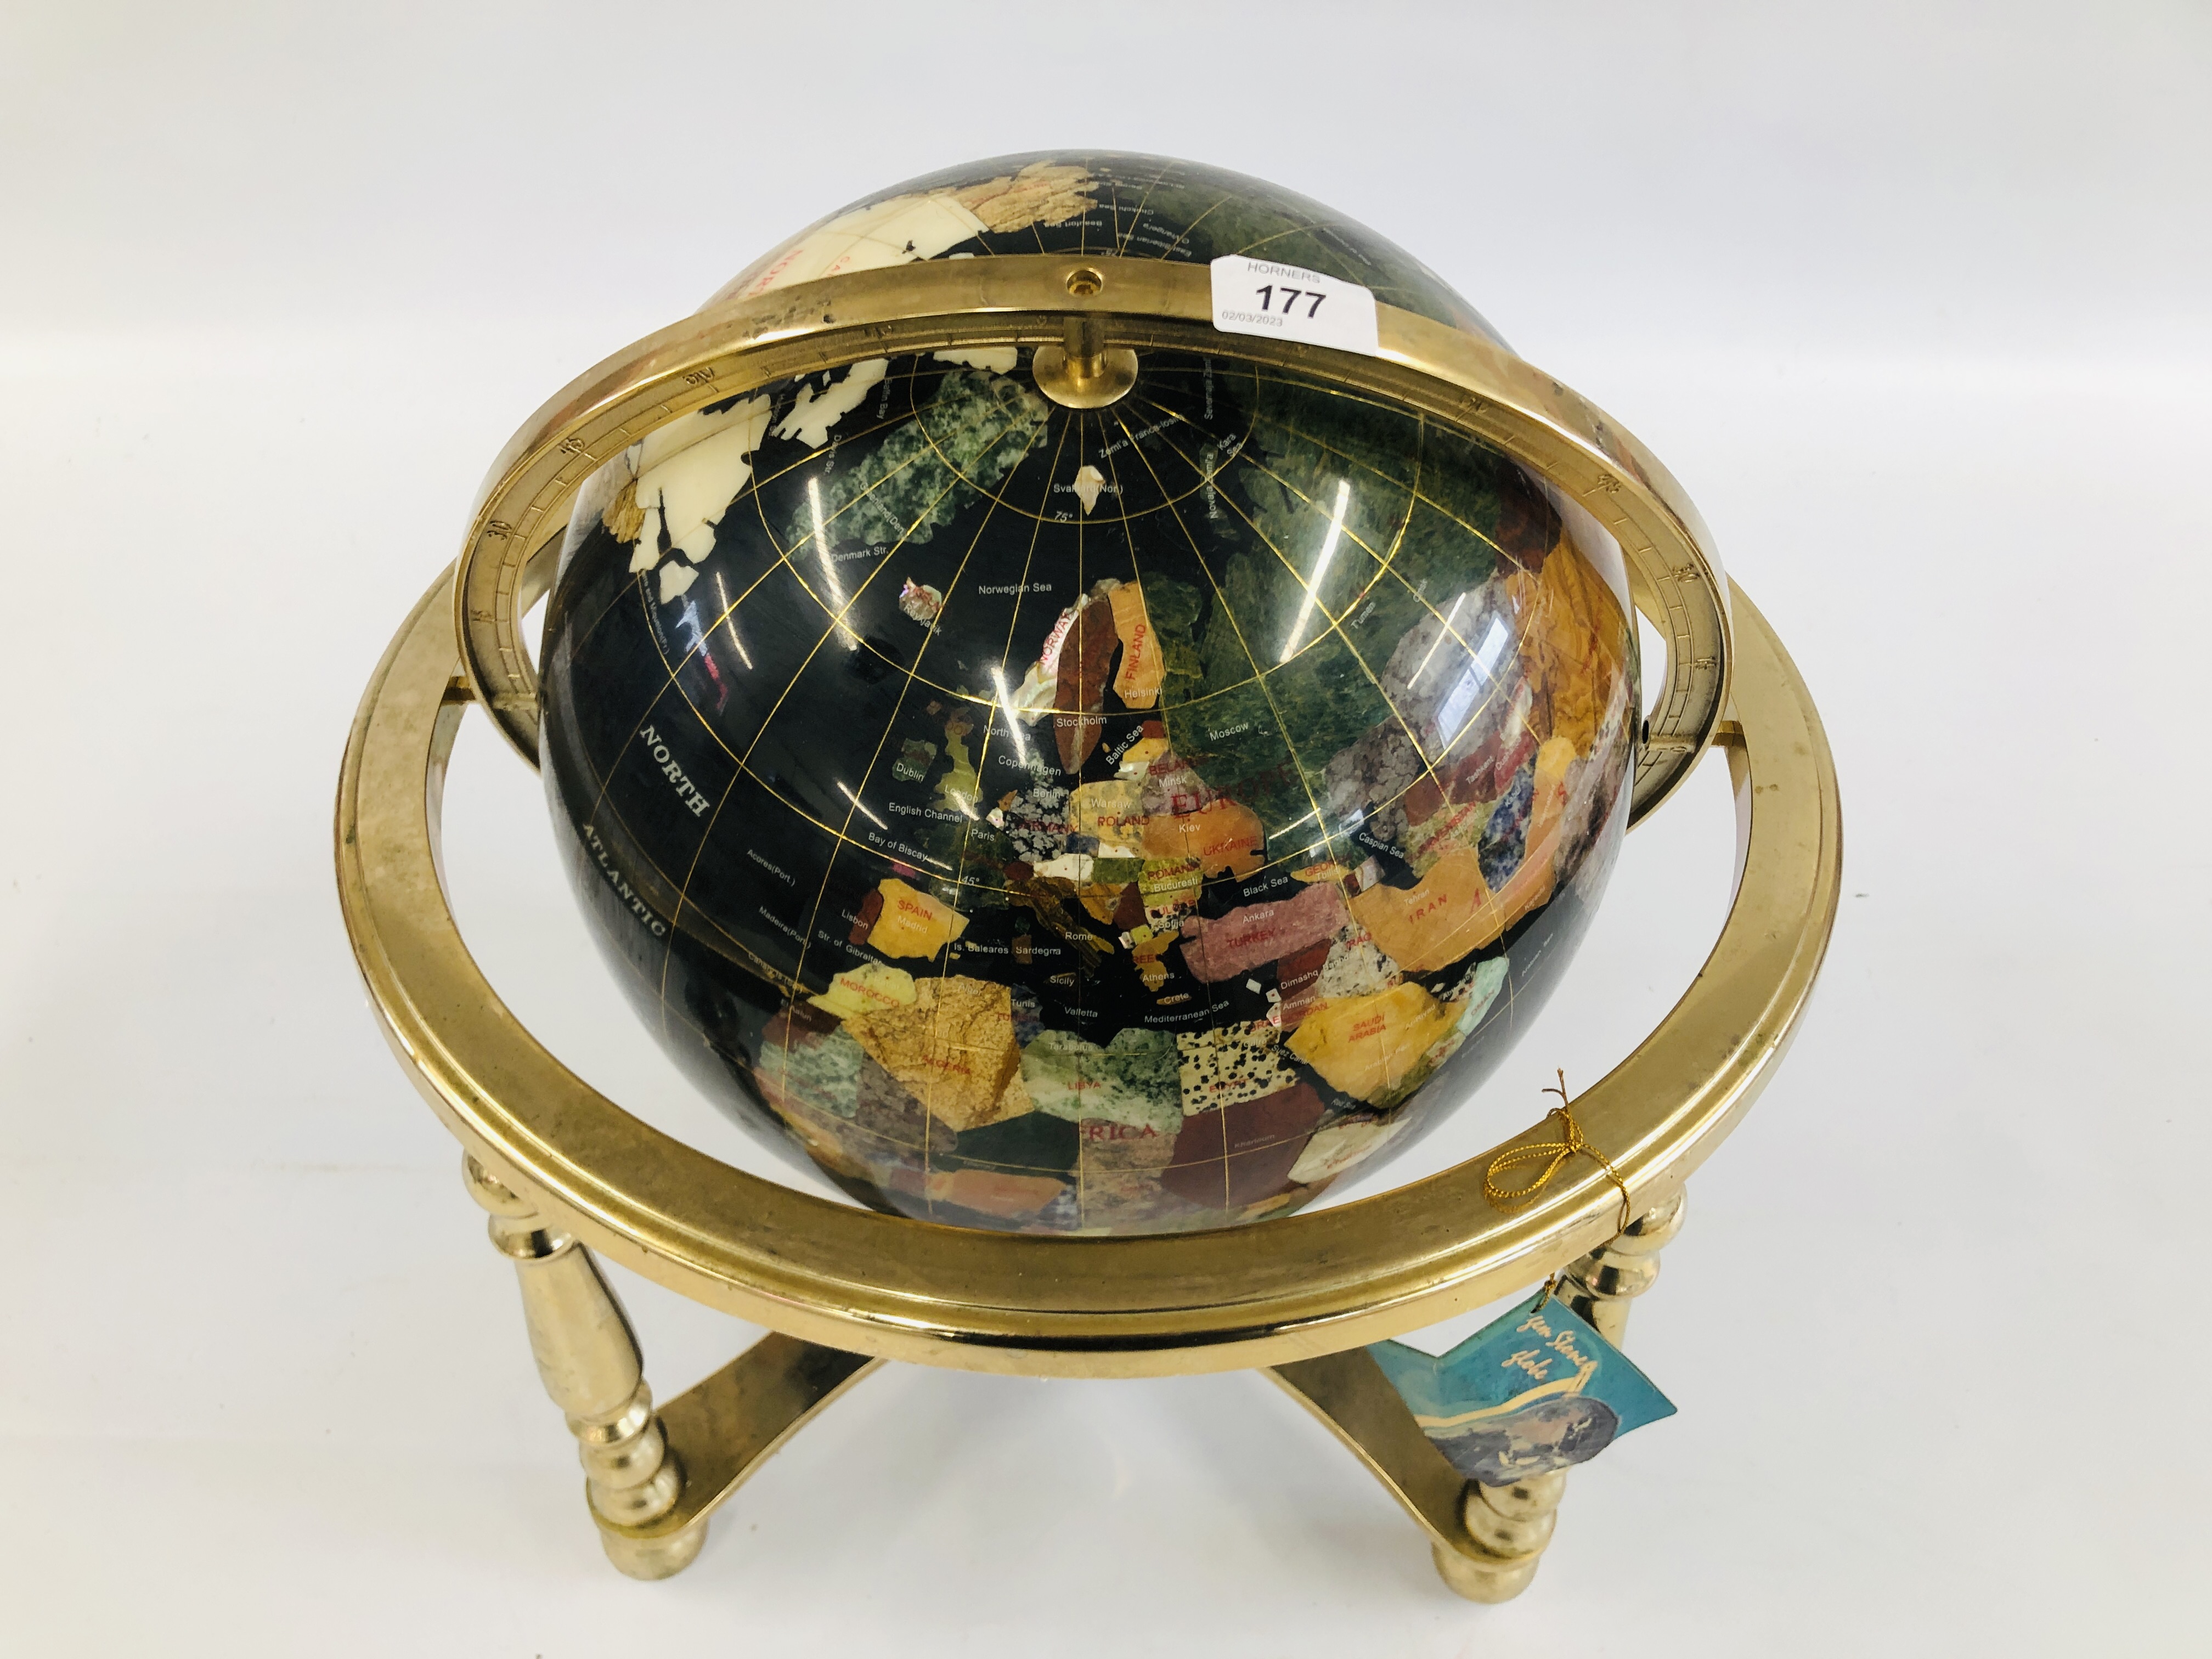 AN IMPRESSIVE LAPIS GLOBE IN BLACK ALONG WITH VALUATION CERTIFICATE FROM 1/1/2005. - Image 2 of 7